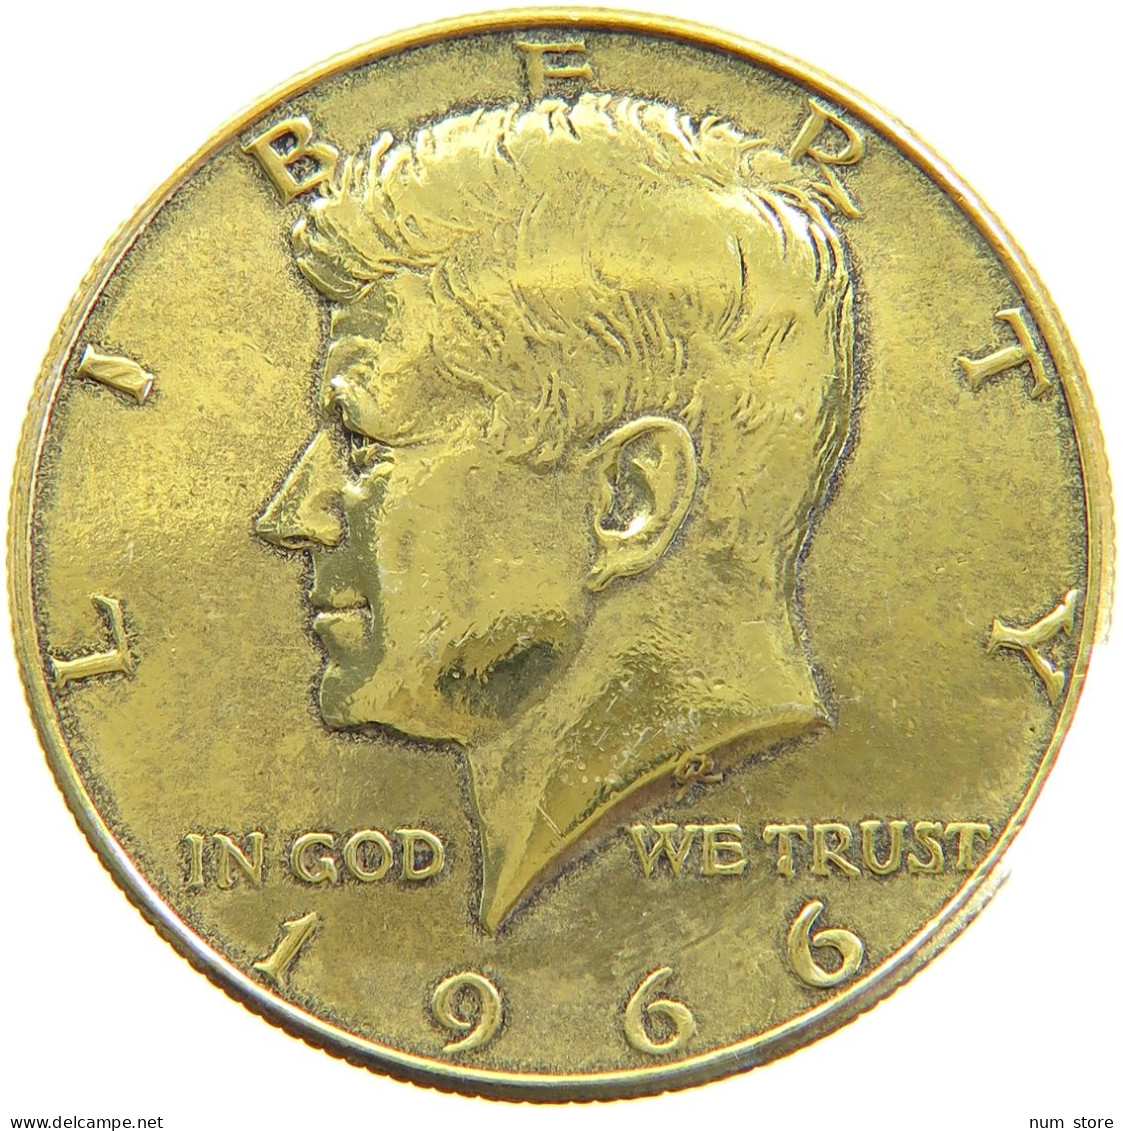 UNITED STATES OF AMERICA 1/2 DOLLAR 1966 KENNEDY GOLD PLATED #s105 0665 - 1964-…: Kennedy